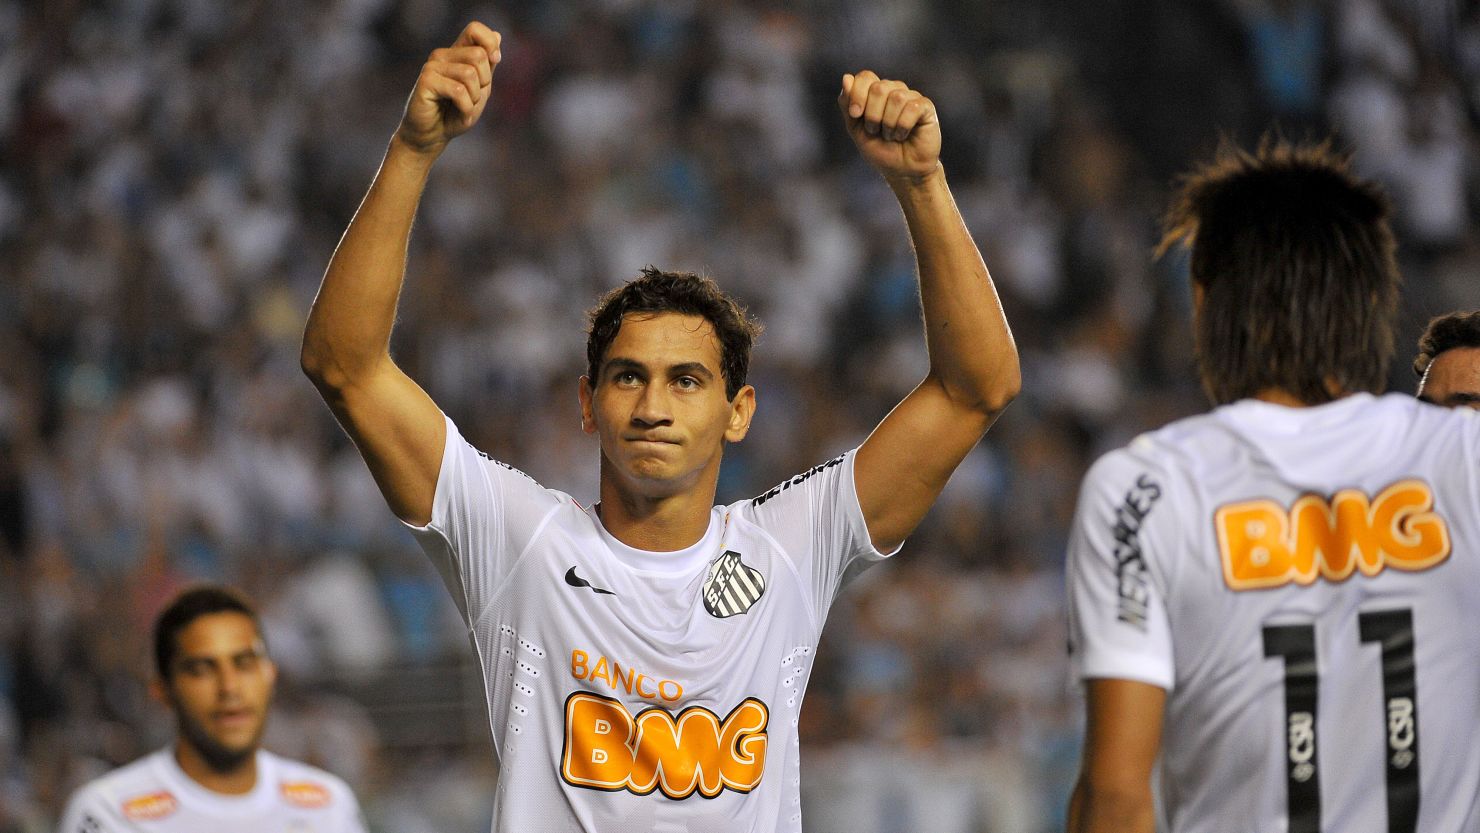 Ganso is set to complete his move to Sao Paulo after the two clubs agreed a $12 million fee for the Brazil midfielder.